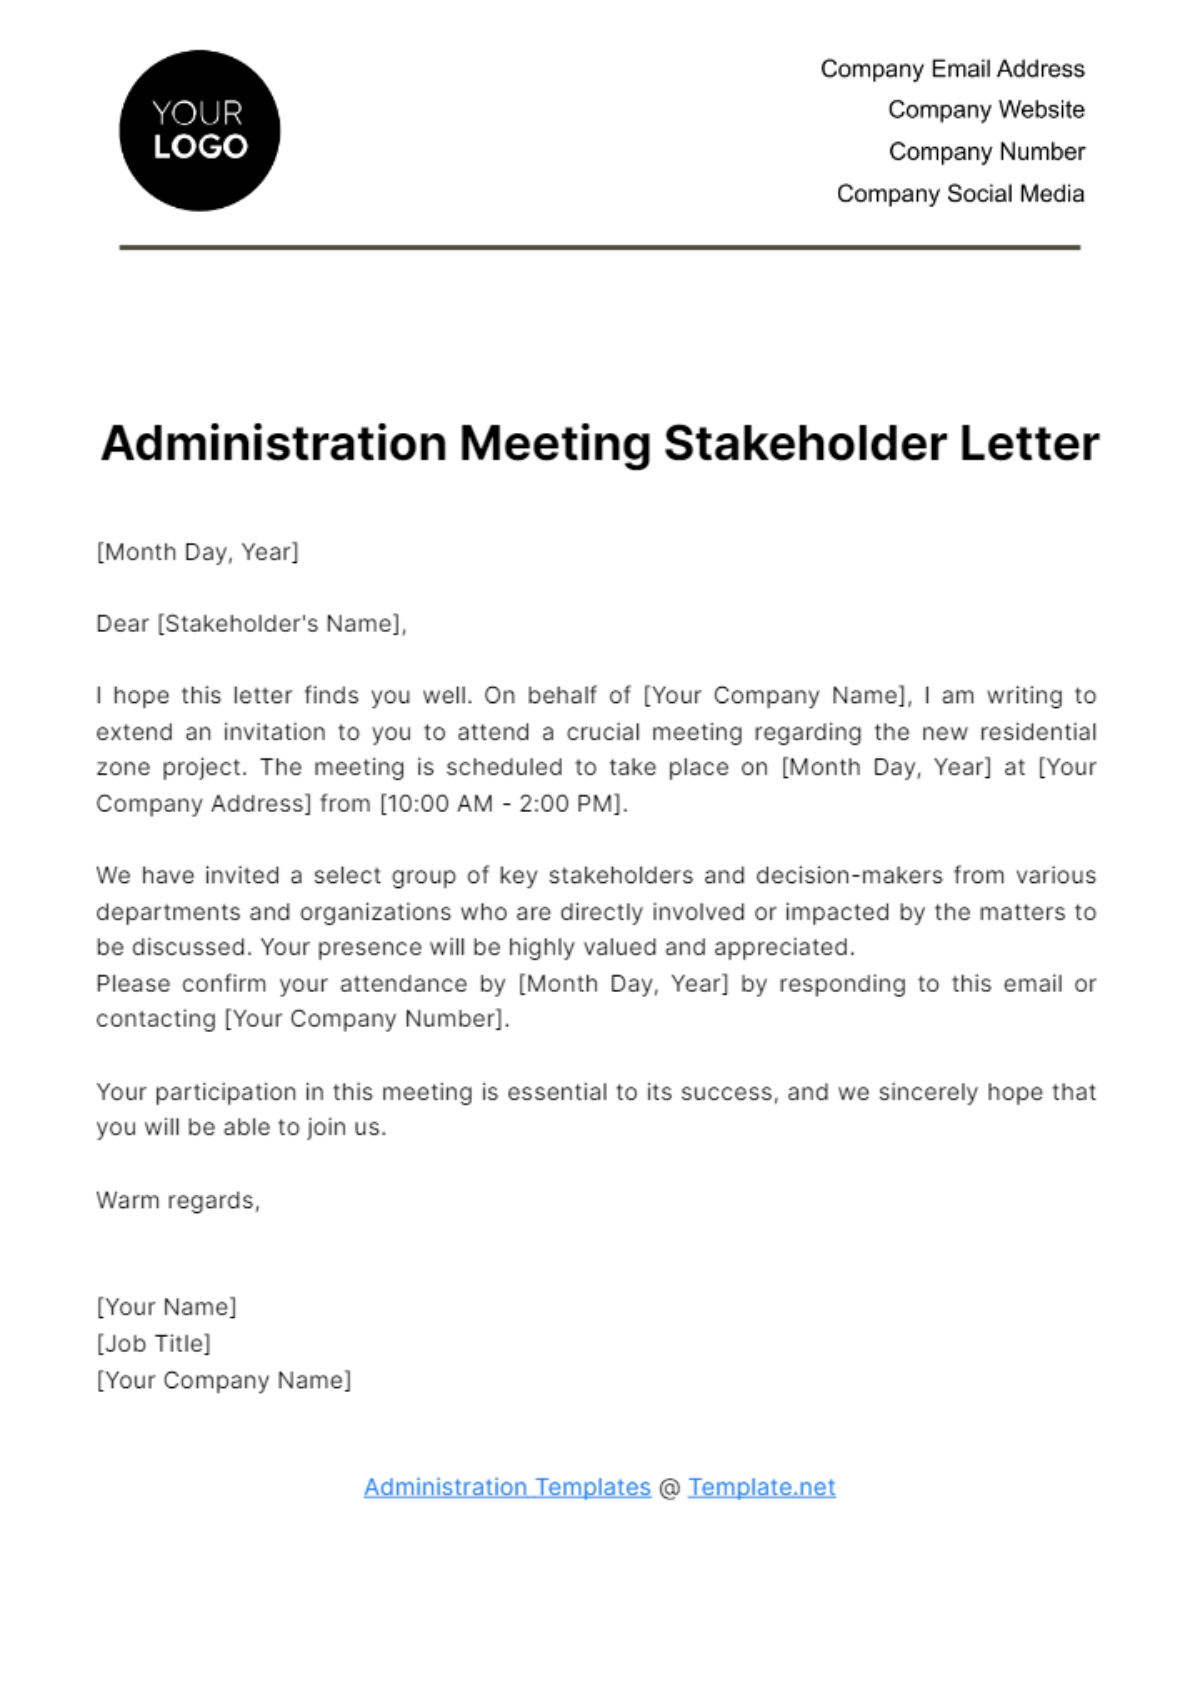 Free Administration Meeting Stakeholder Letter Template